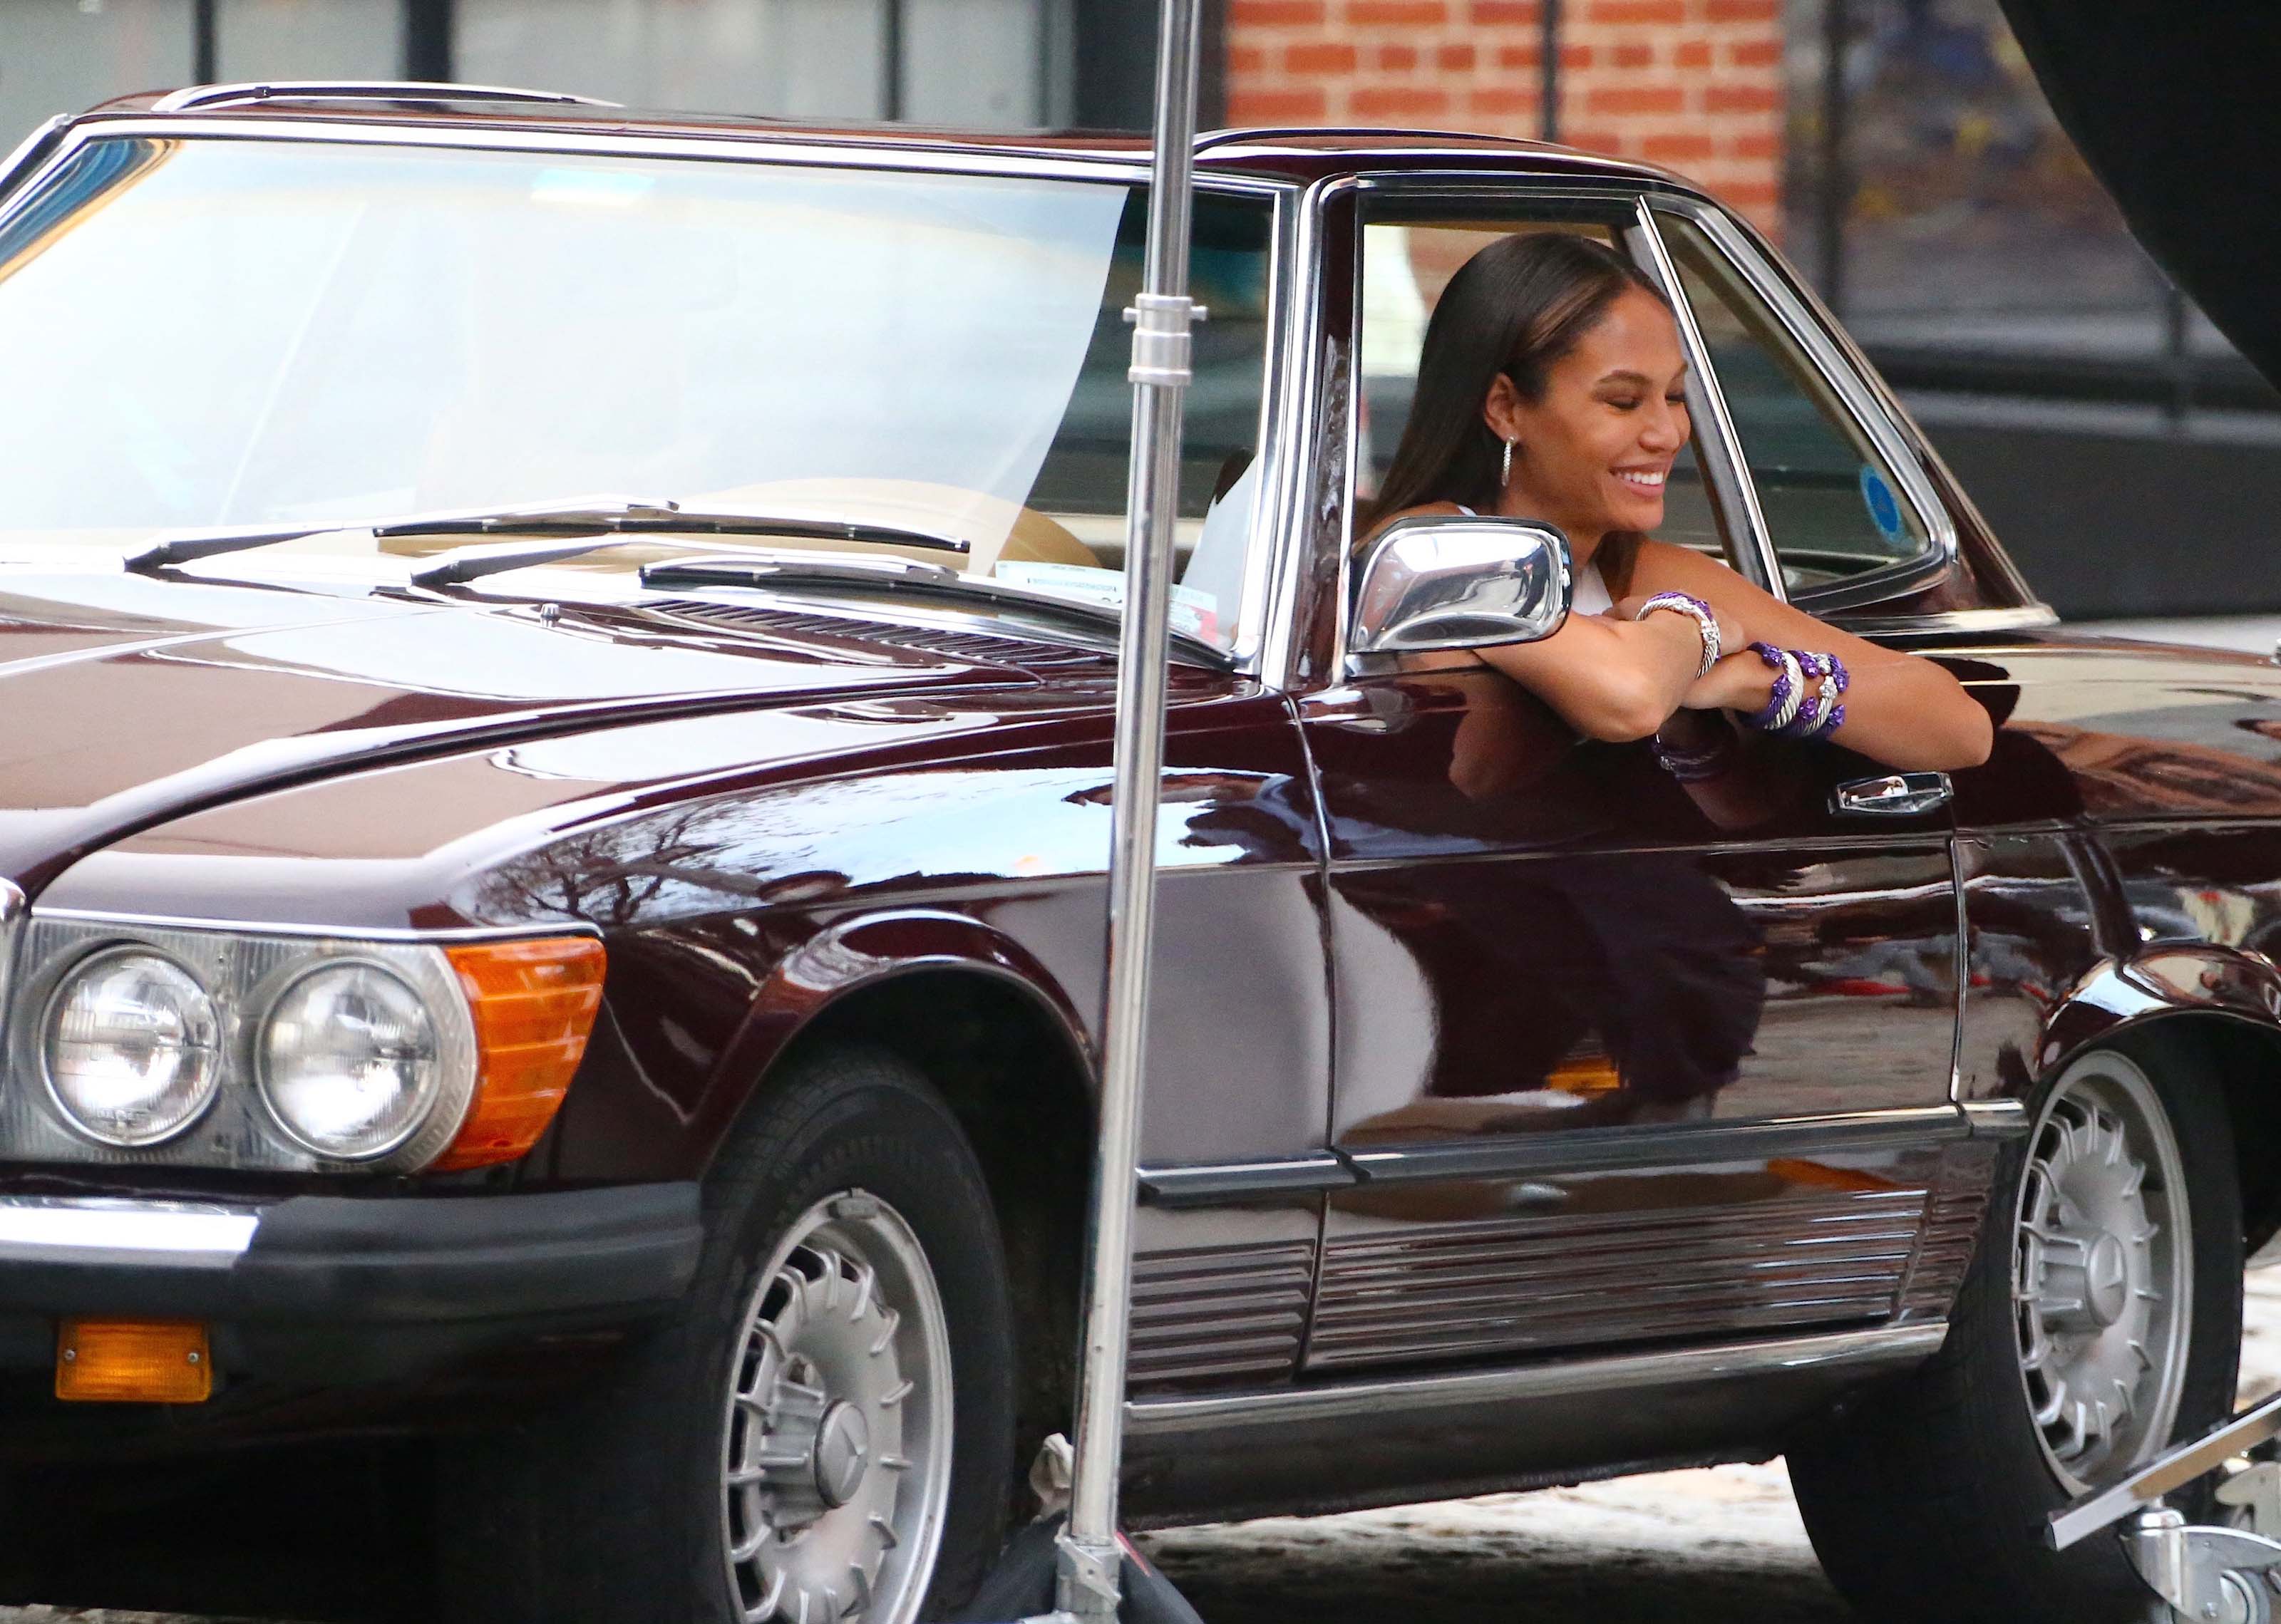 Joan Smalls doing a photoshoot in Tribeca, New York City